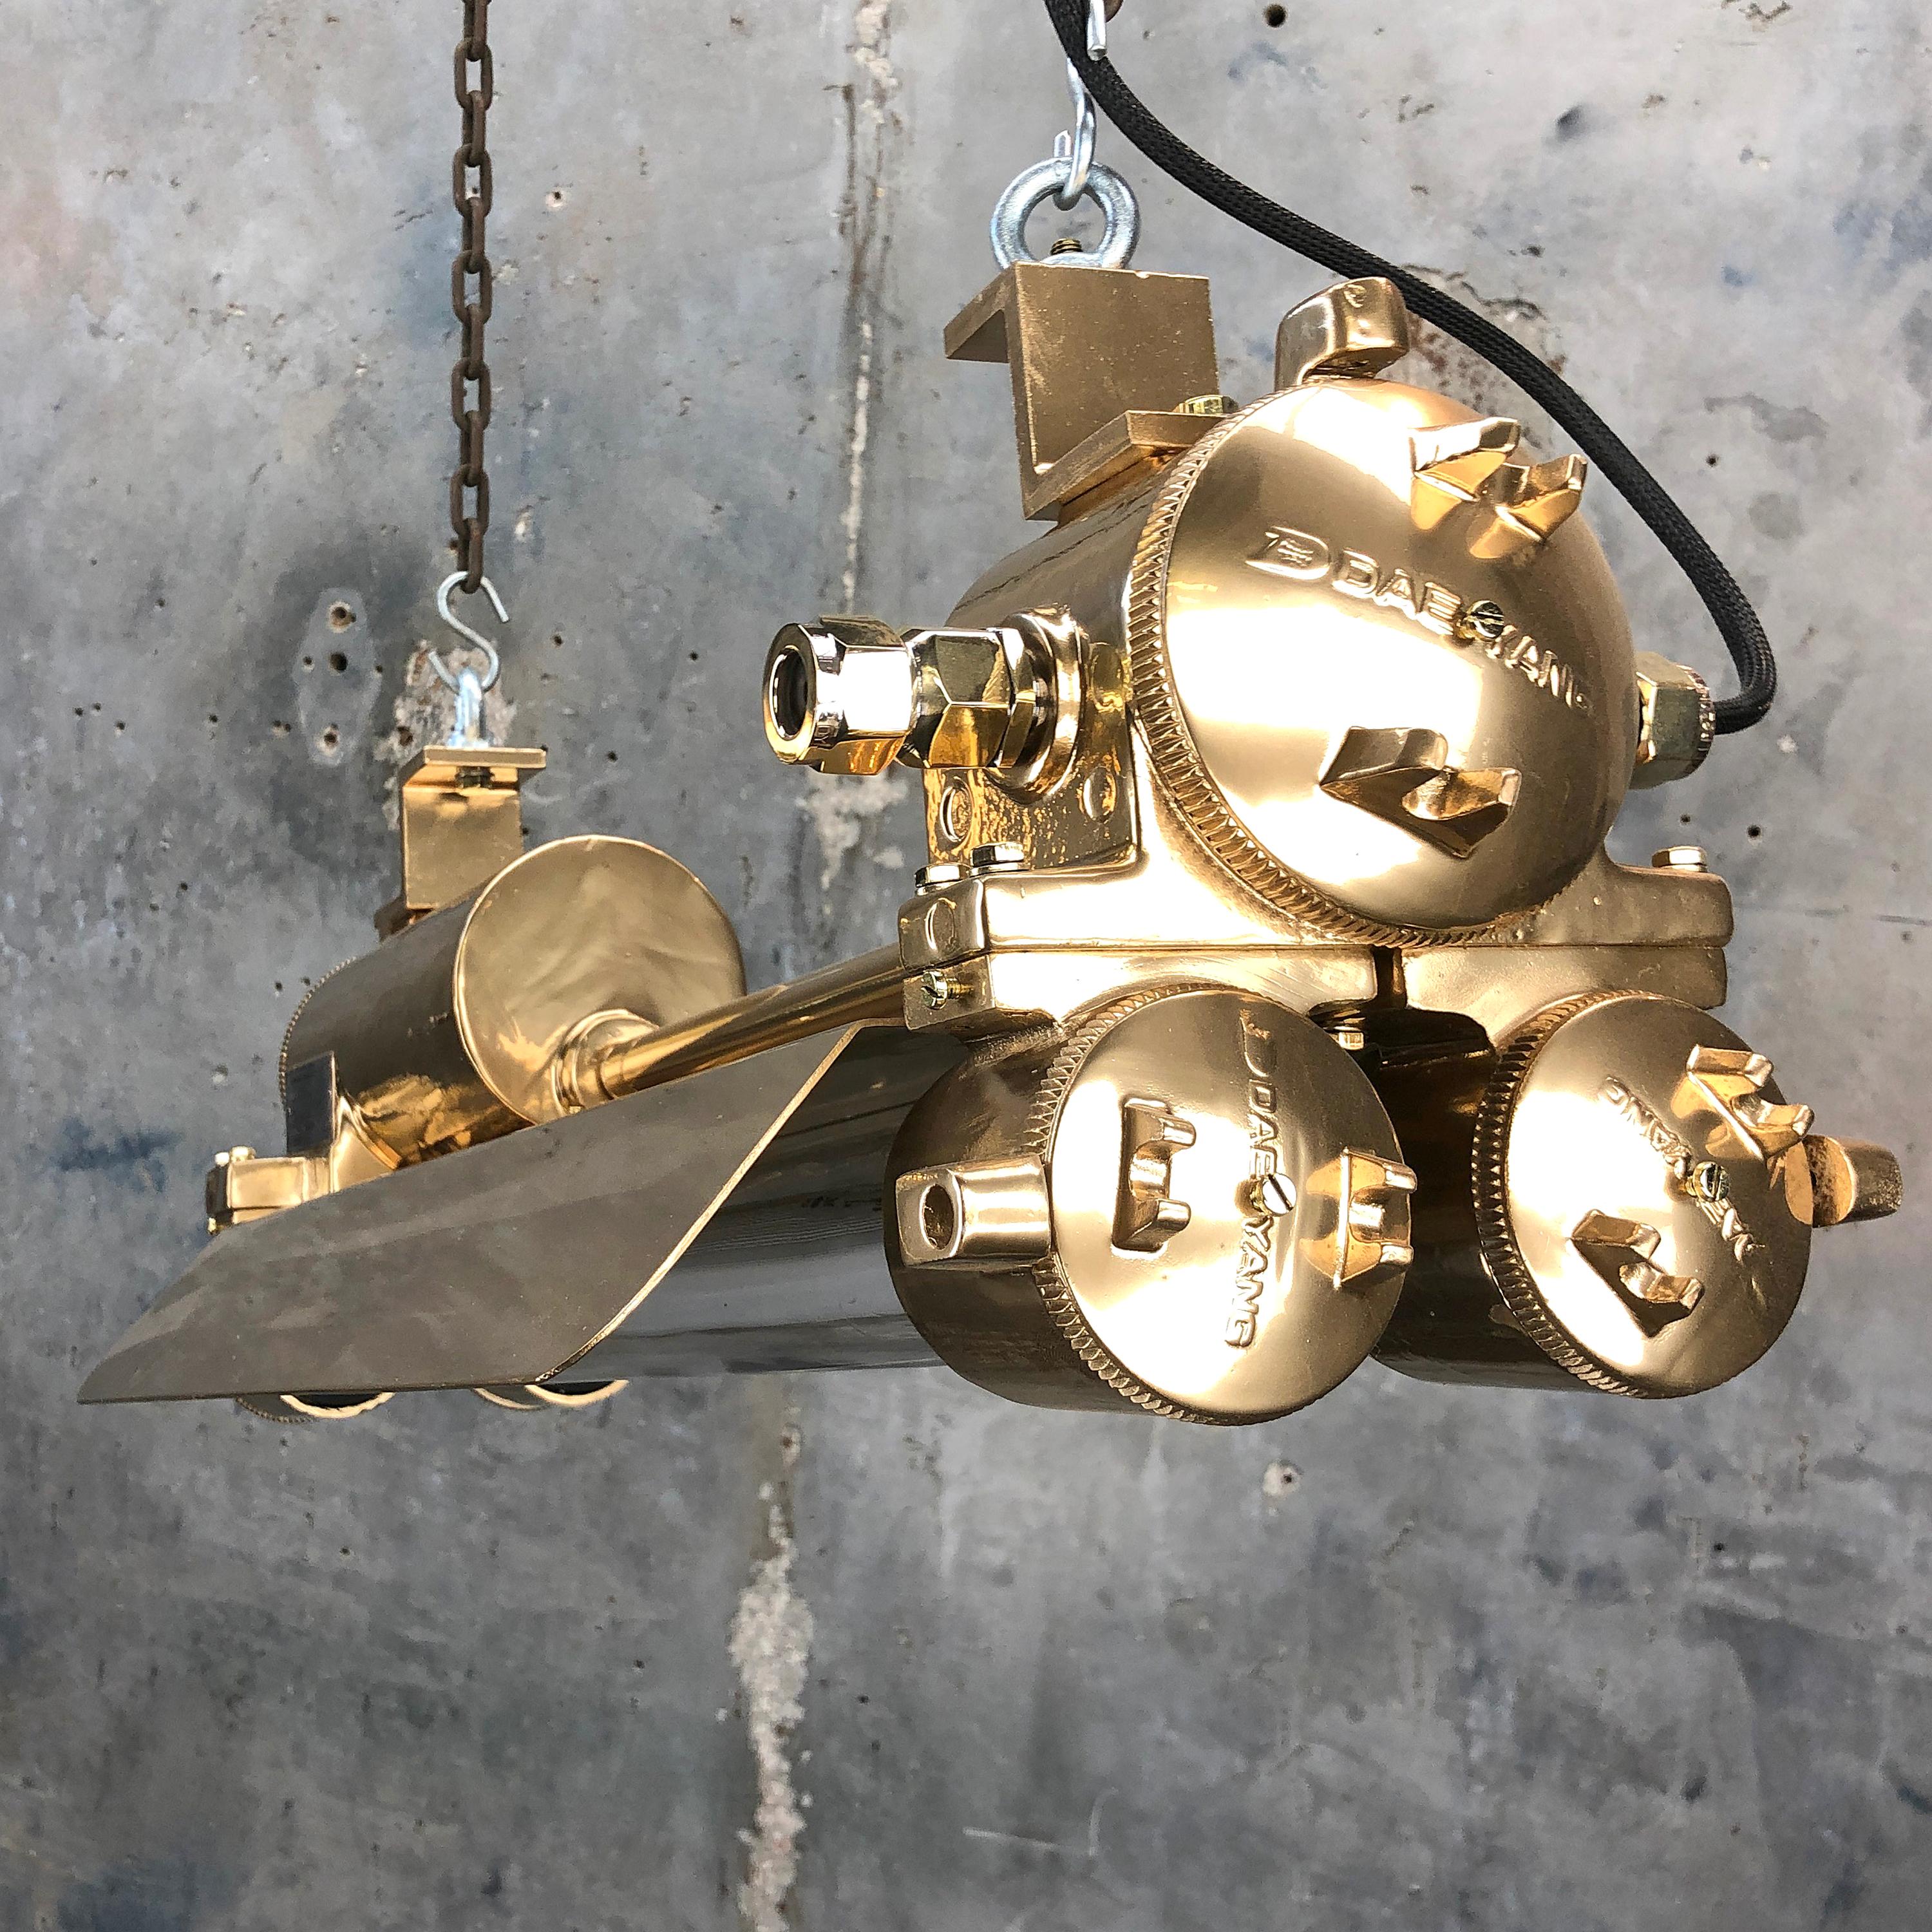 1970s Industrial Gold, Polished Brass Flameproof Strip Light with Glass Shades 10